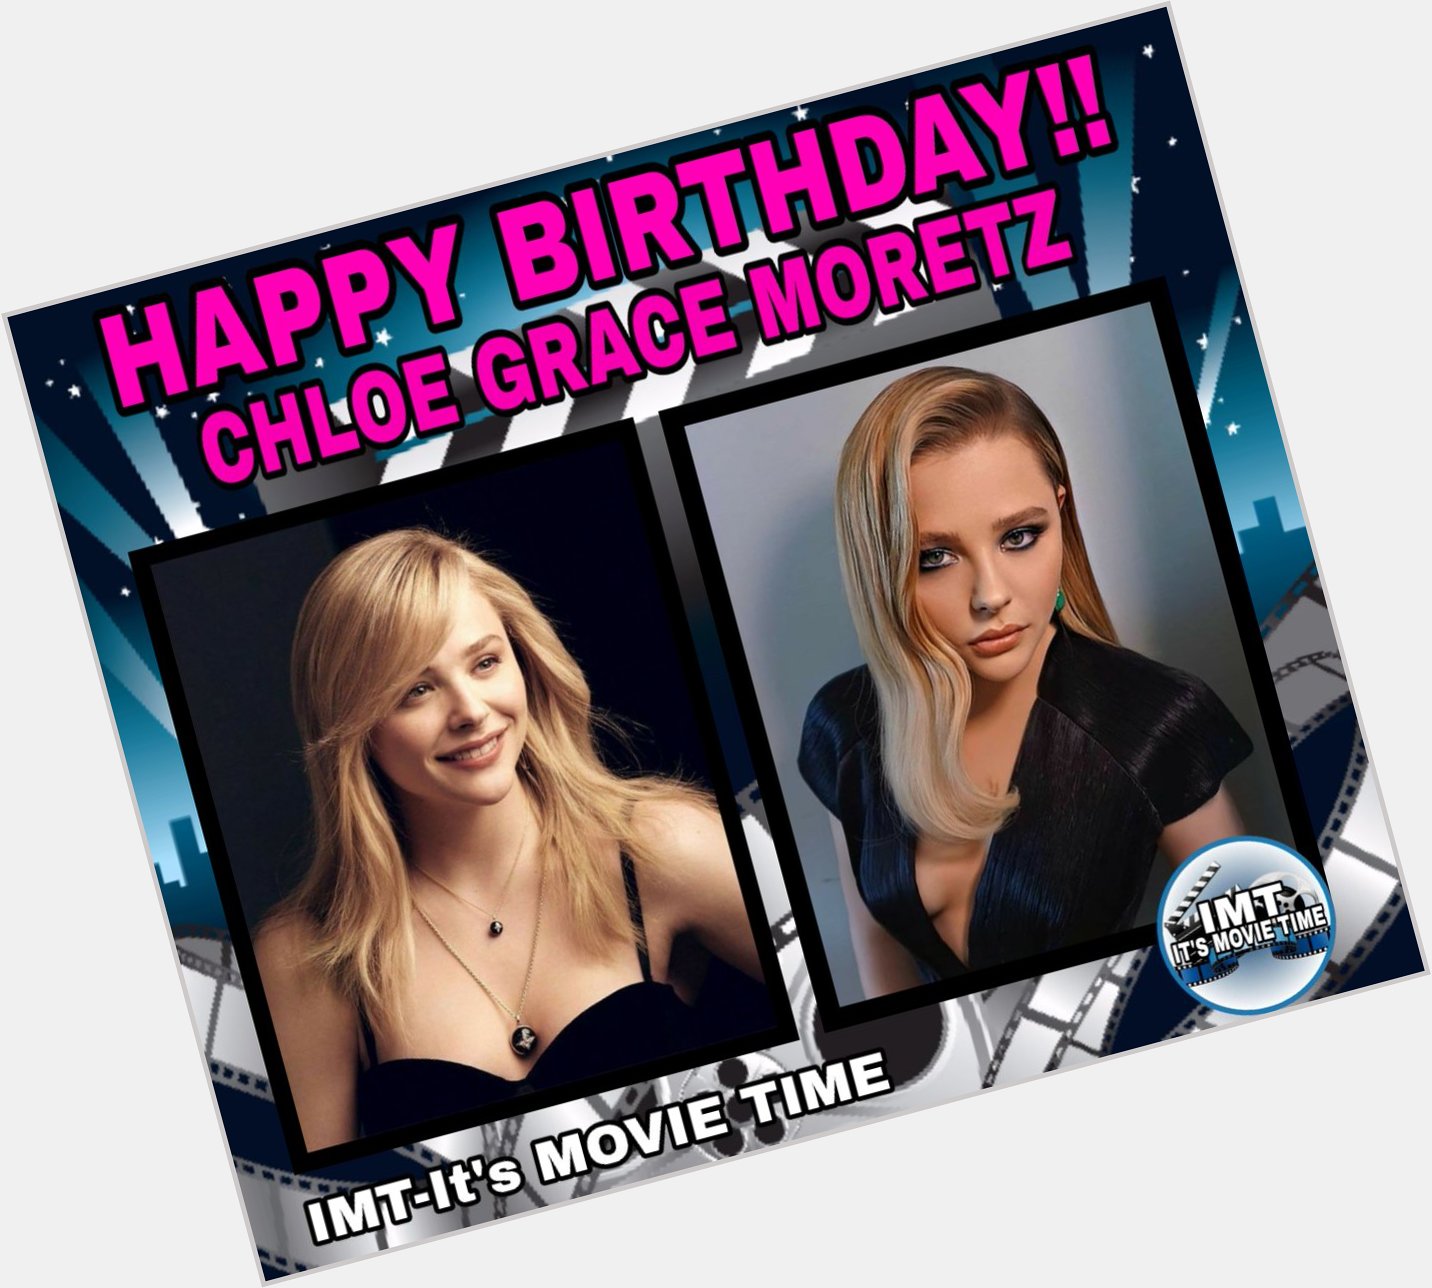 Happy Birthday to the Beautiful Chloe Grace Moretz! The actress is celebrating 23 years. 